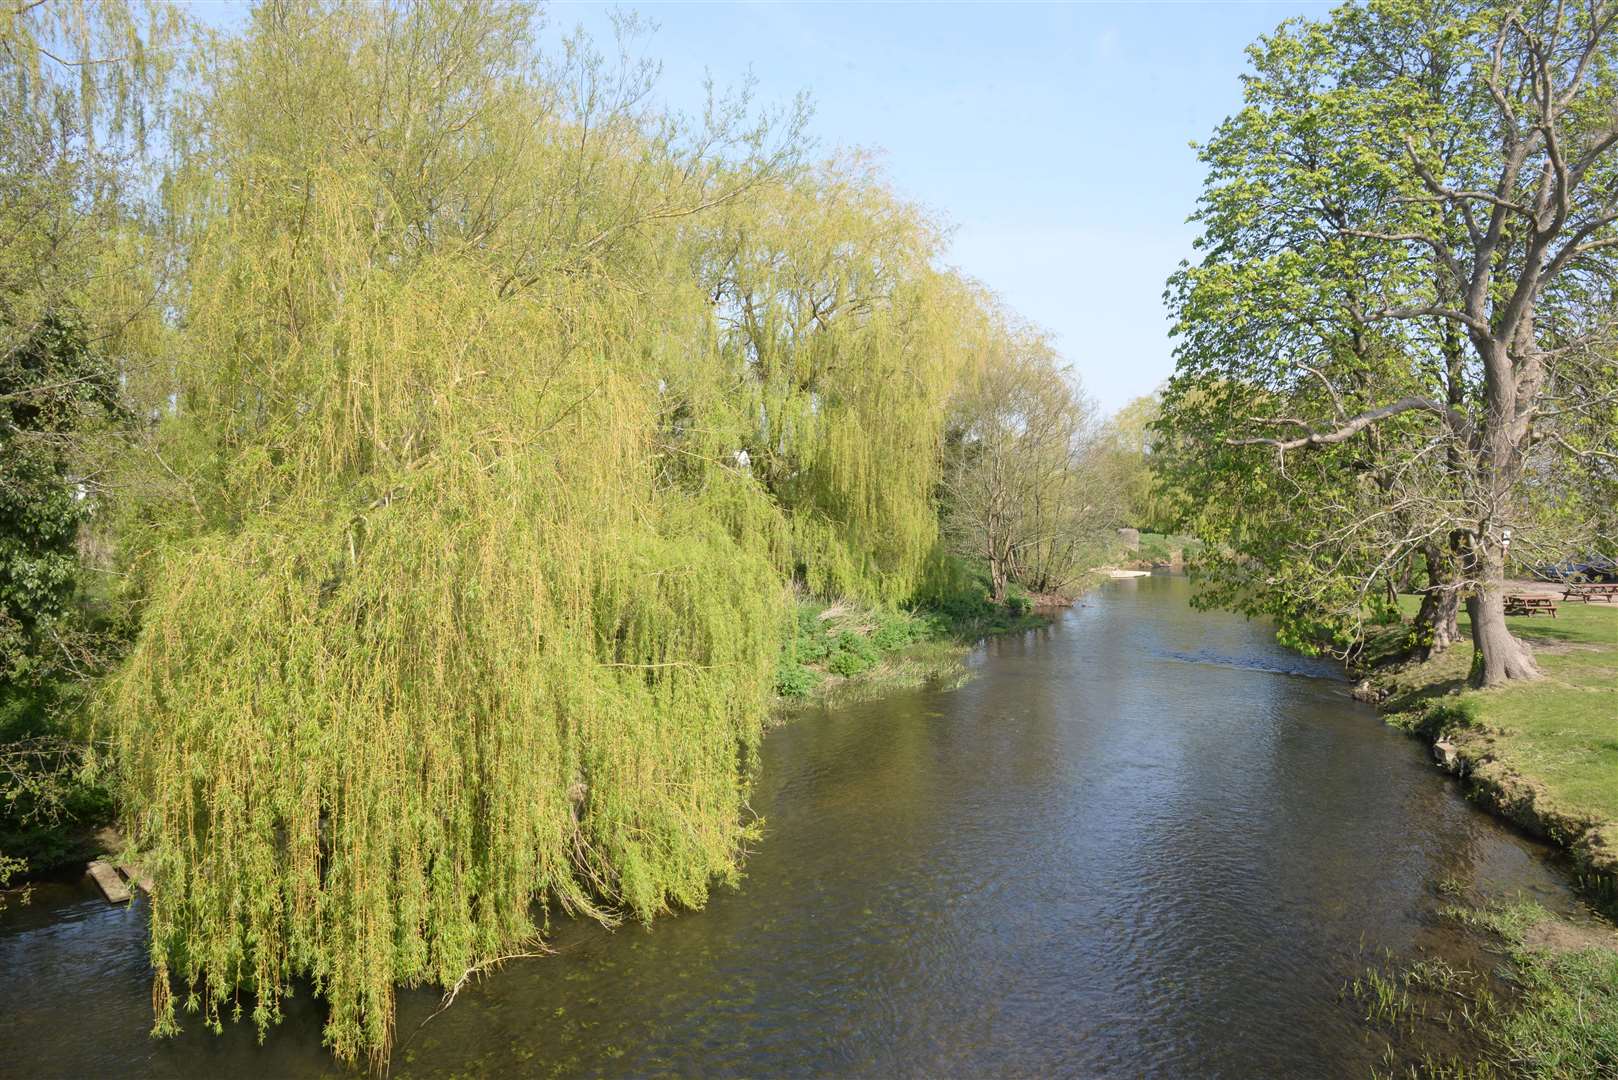 The River Stour at Wye